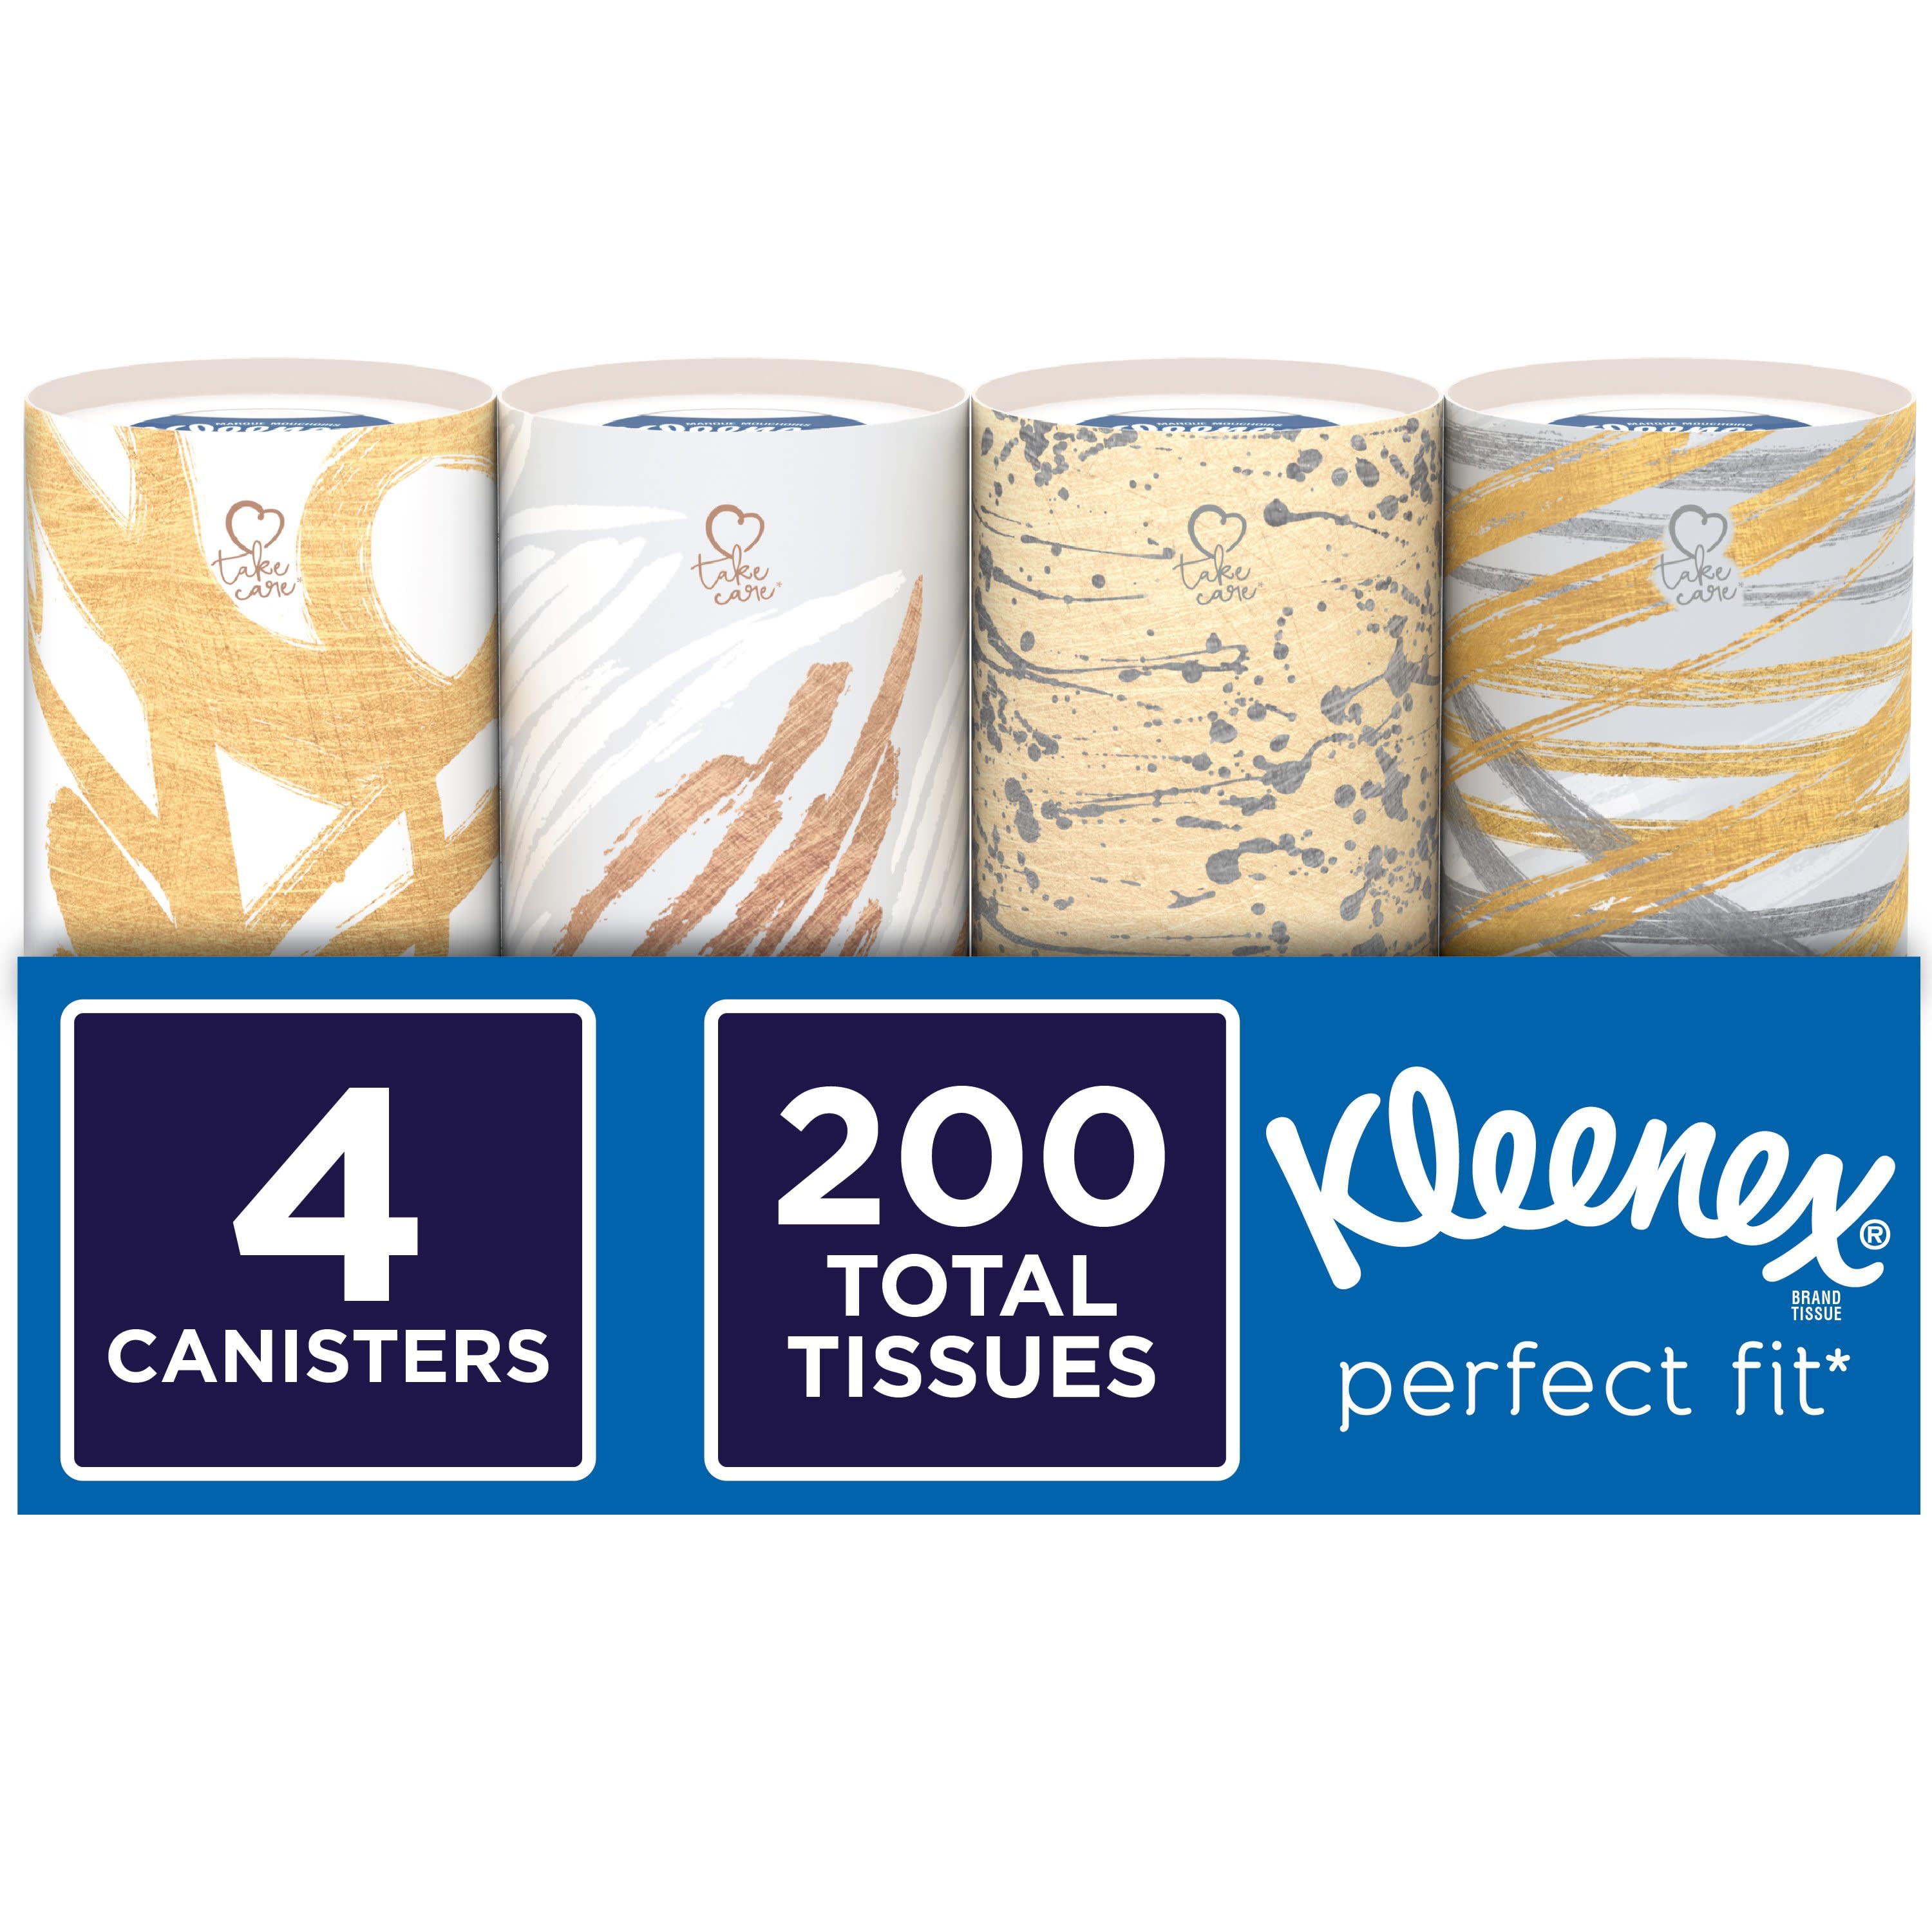 Reeflex Car Tissues (4 Canisters/200 Tissues)  Facial tissue box, New car  accessories, Cup holder